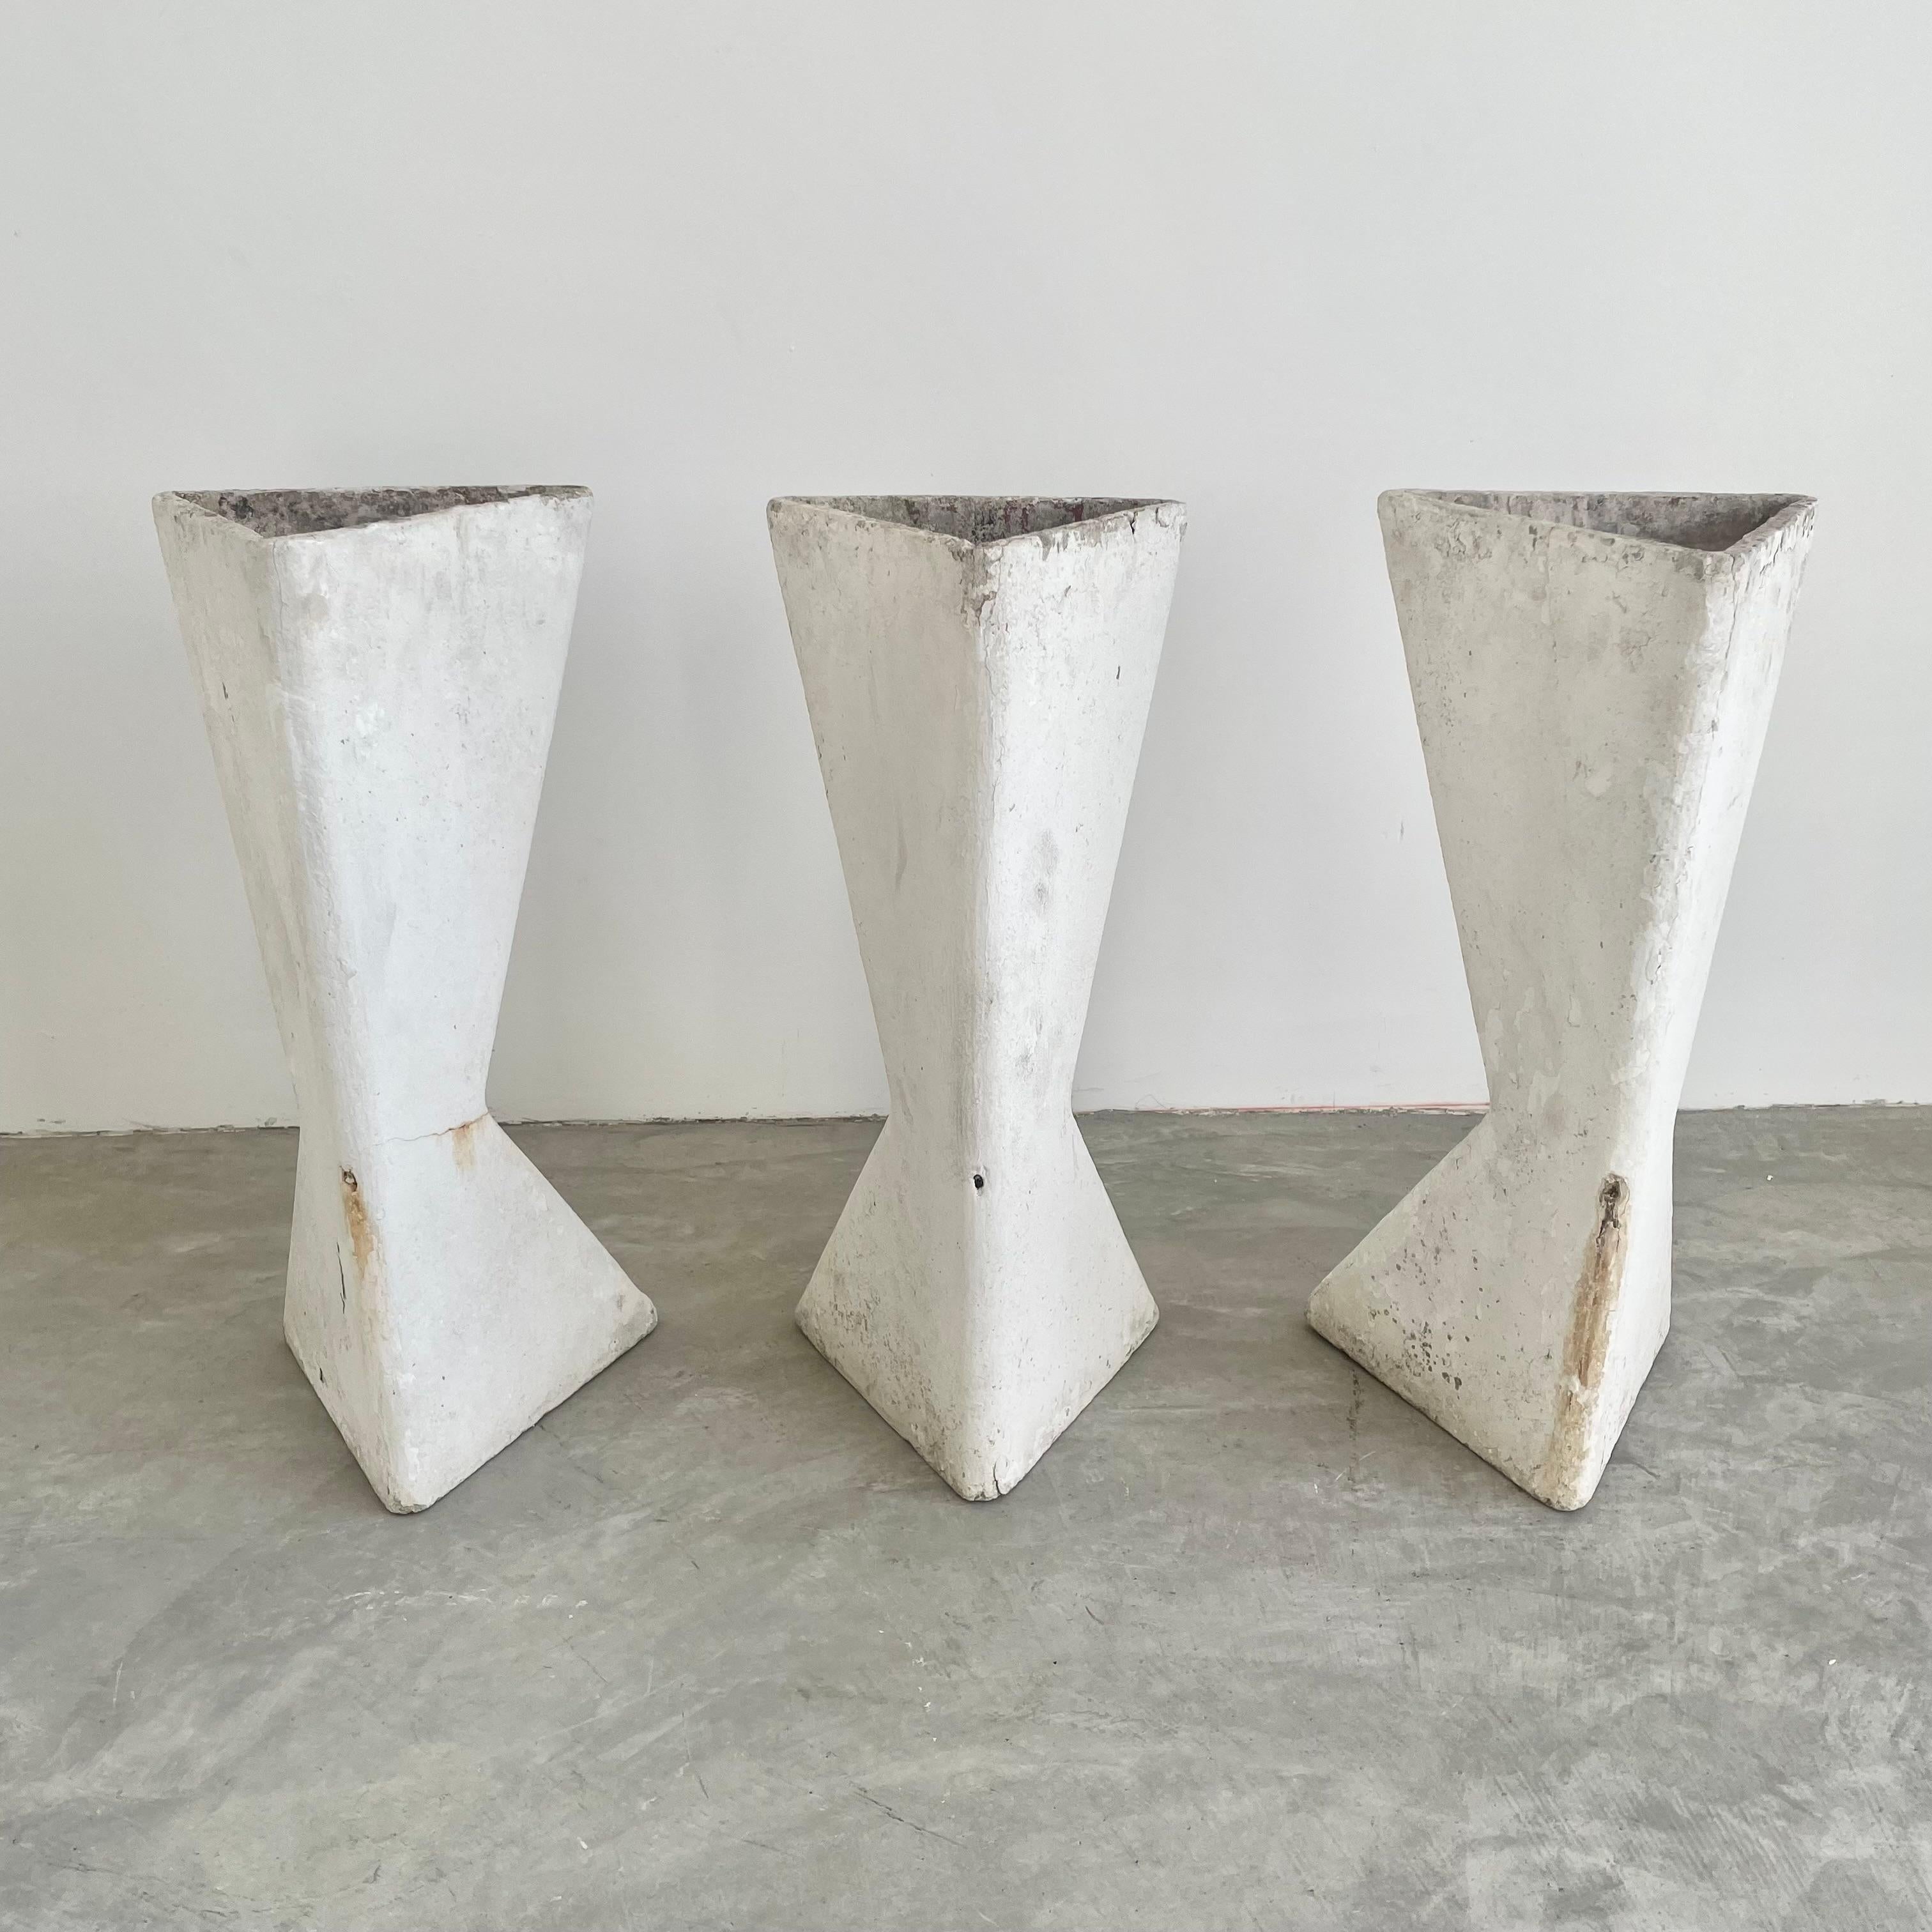 Set of 3 Sculptural Triangular Planters by Willy Guhl, 1960s For Sale 4